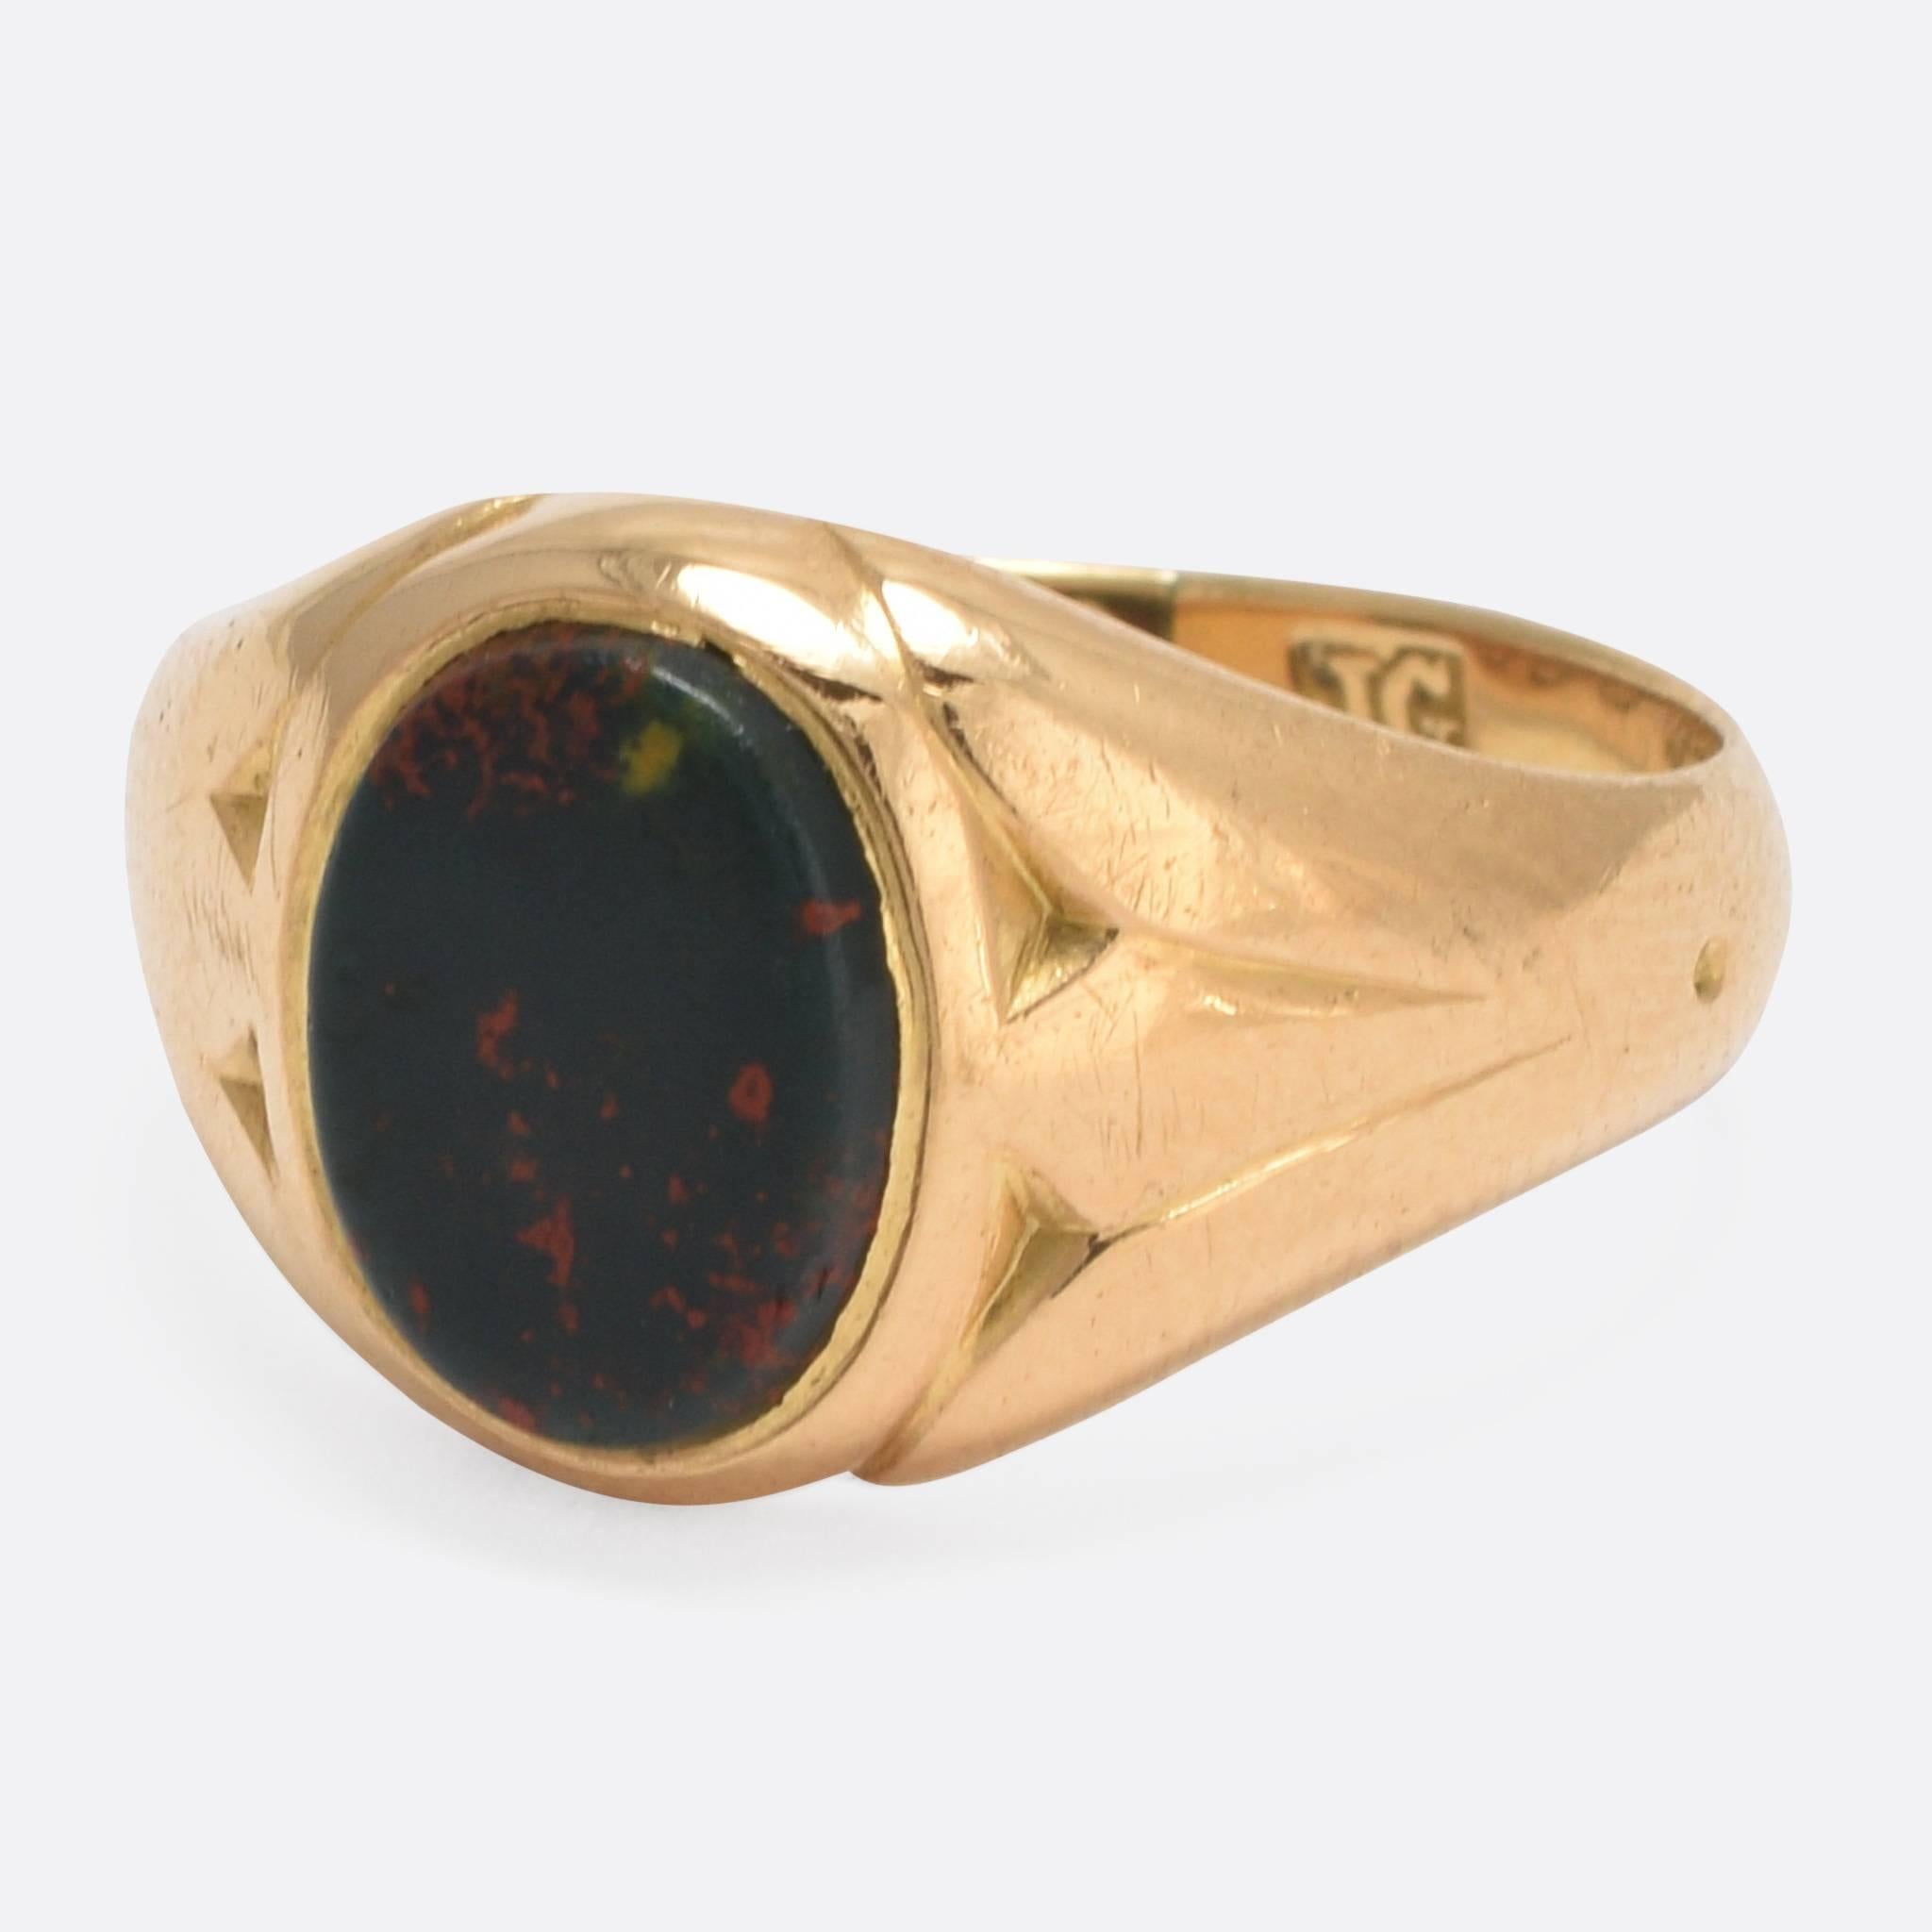 This stylish antique signet ring is set with an oval bloodstone agate panel that remains uncarved. The shoulders feature subtle detailing, and the piece bears clear Chester hallmarks for 18k gold and the year 1900. A lovely, smaller scale piece,